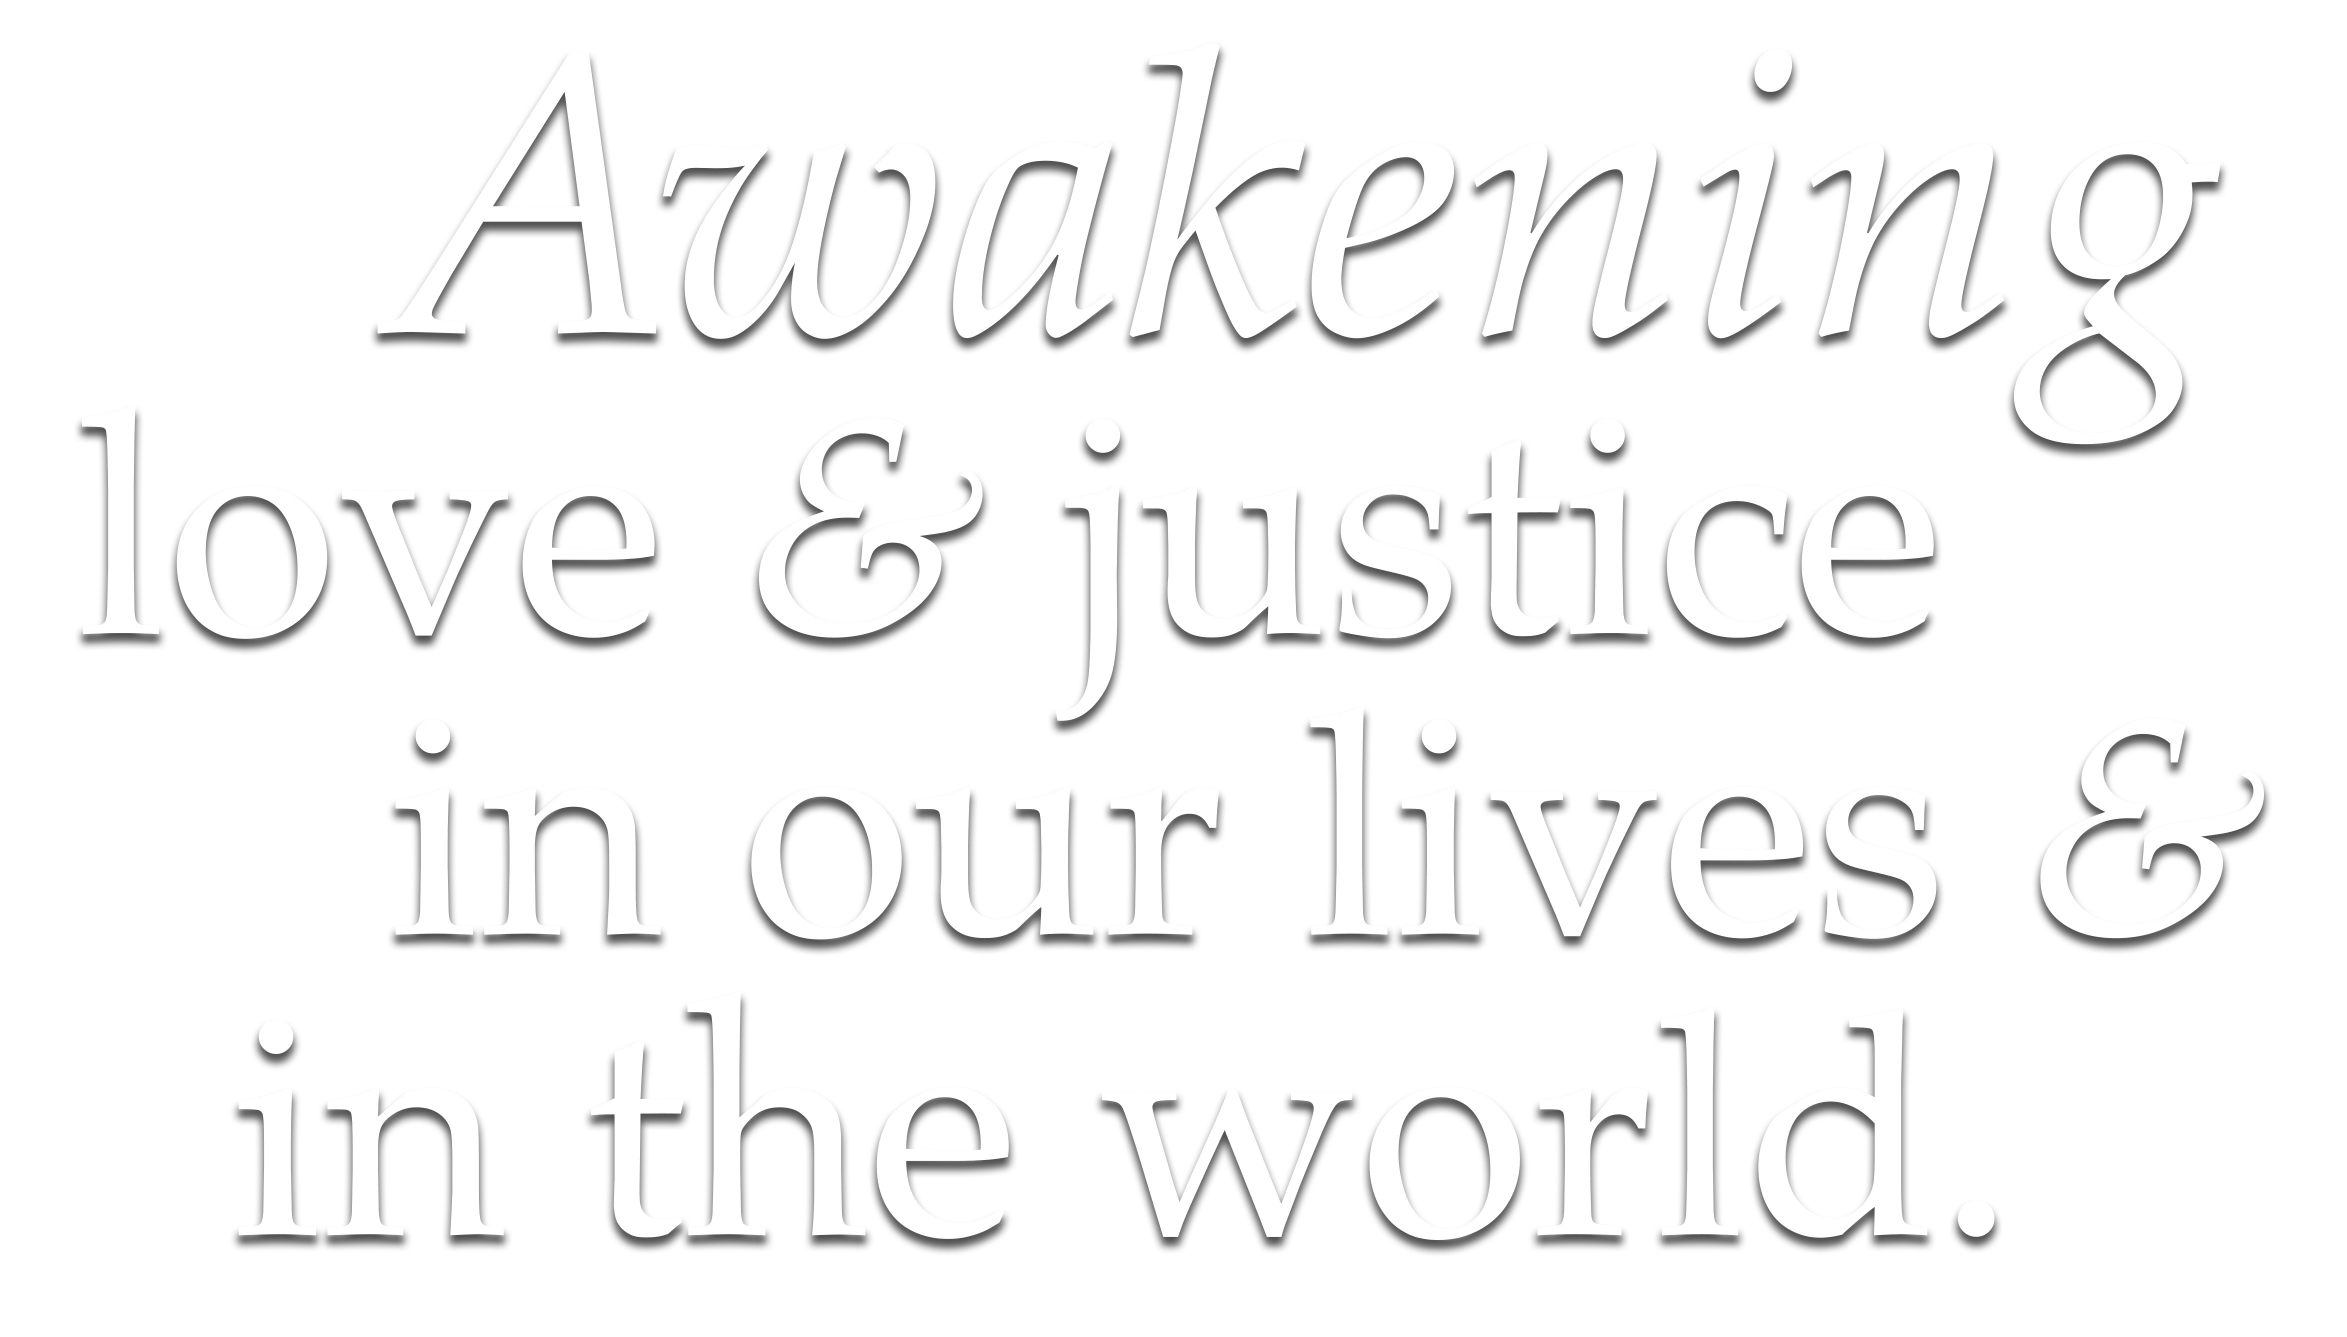 Awakening love & justice in our lives & in the world.